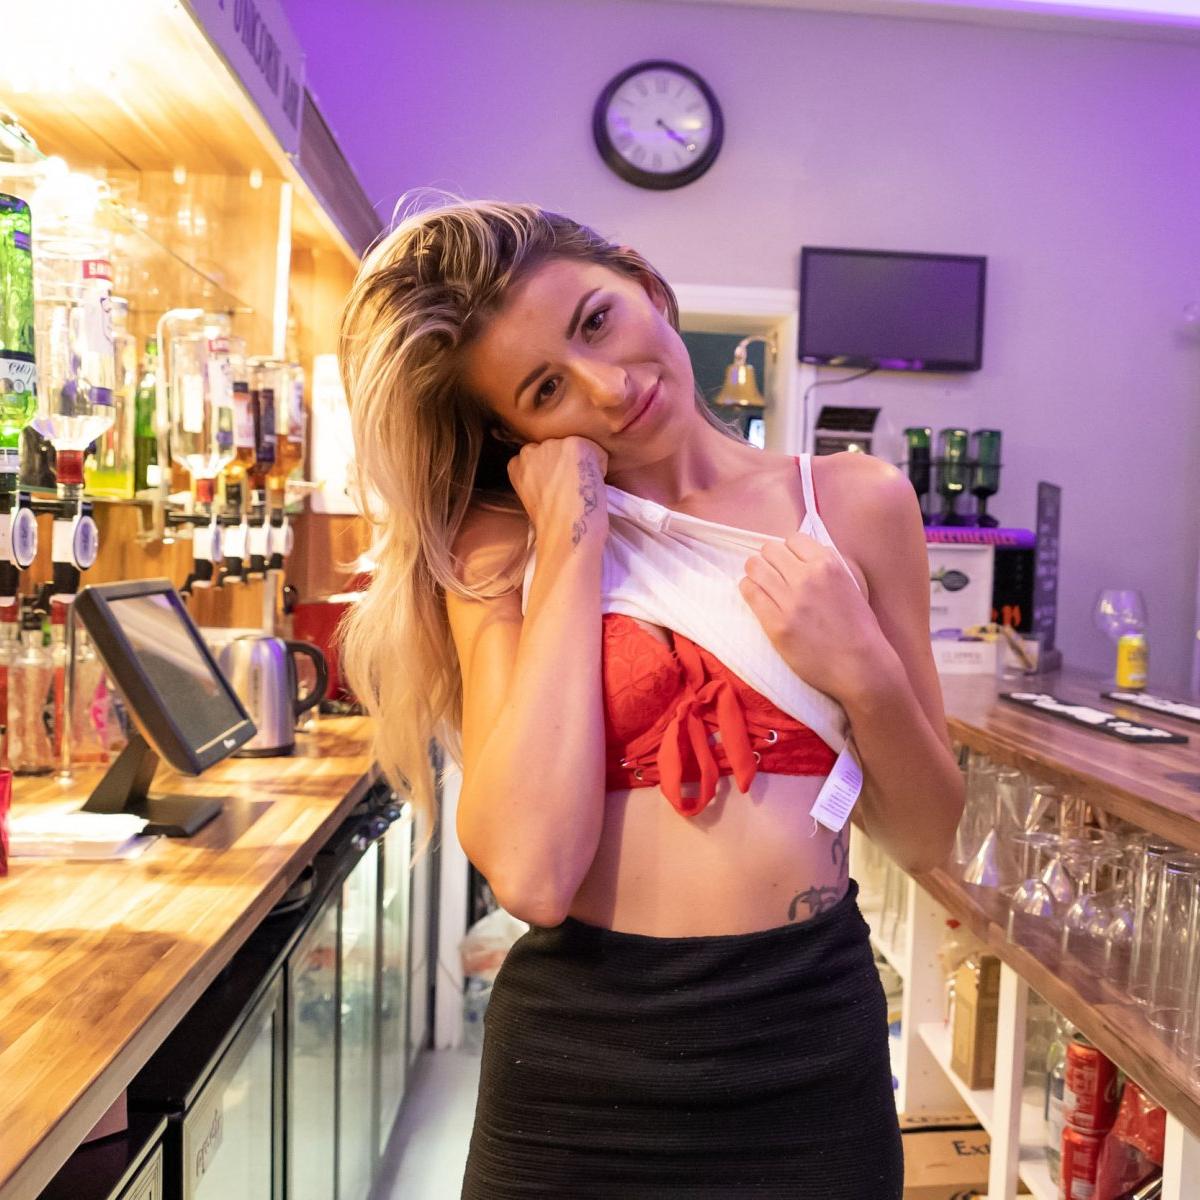 Barmaid Bianca would like to see you naked